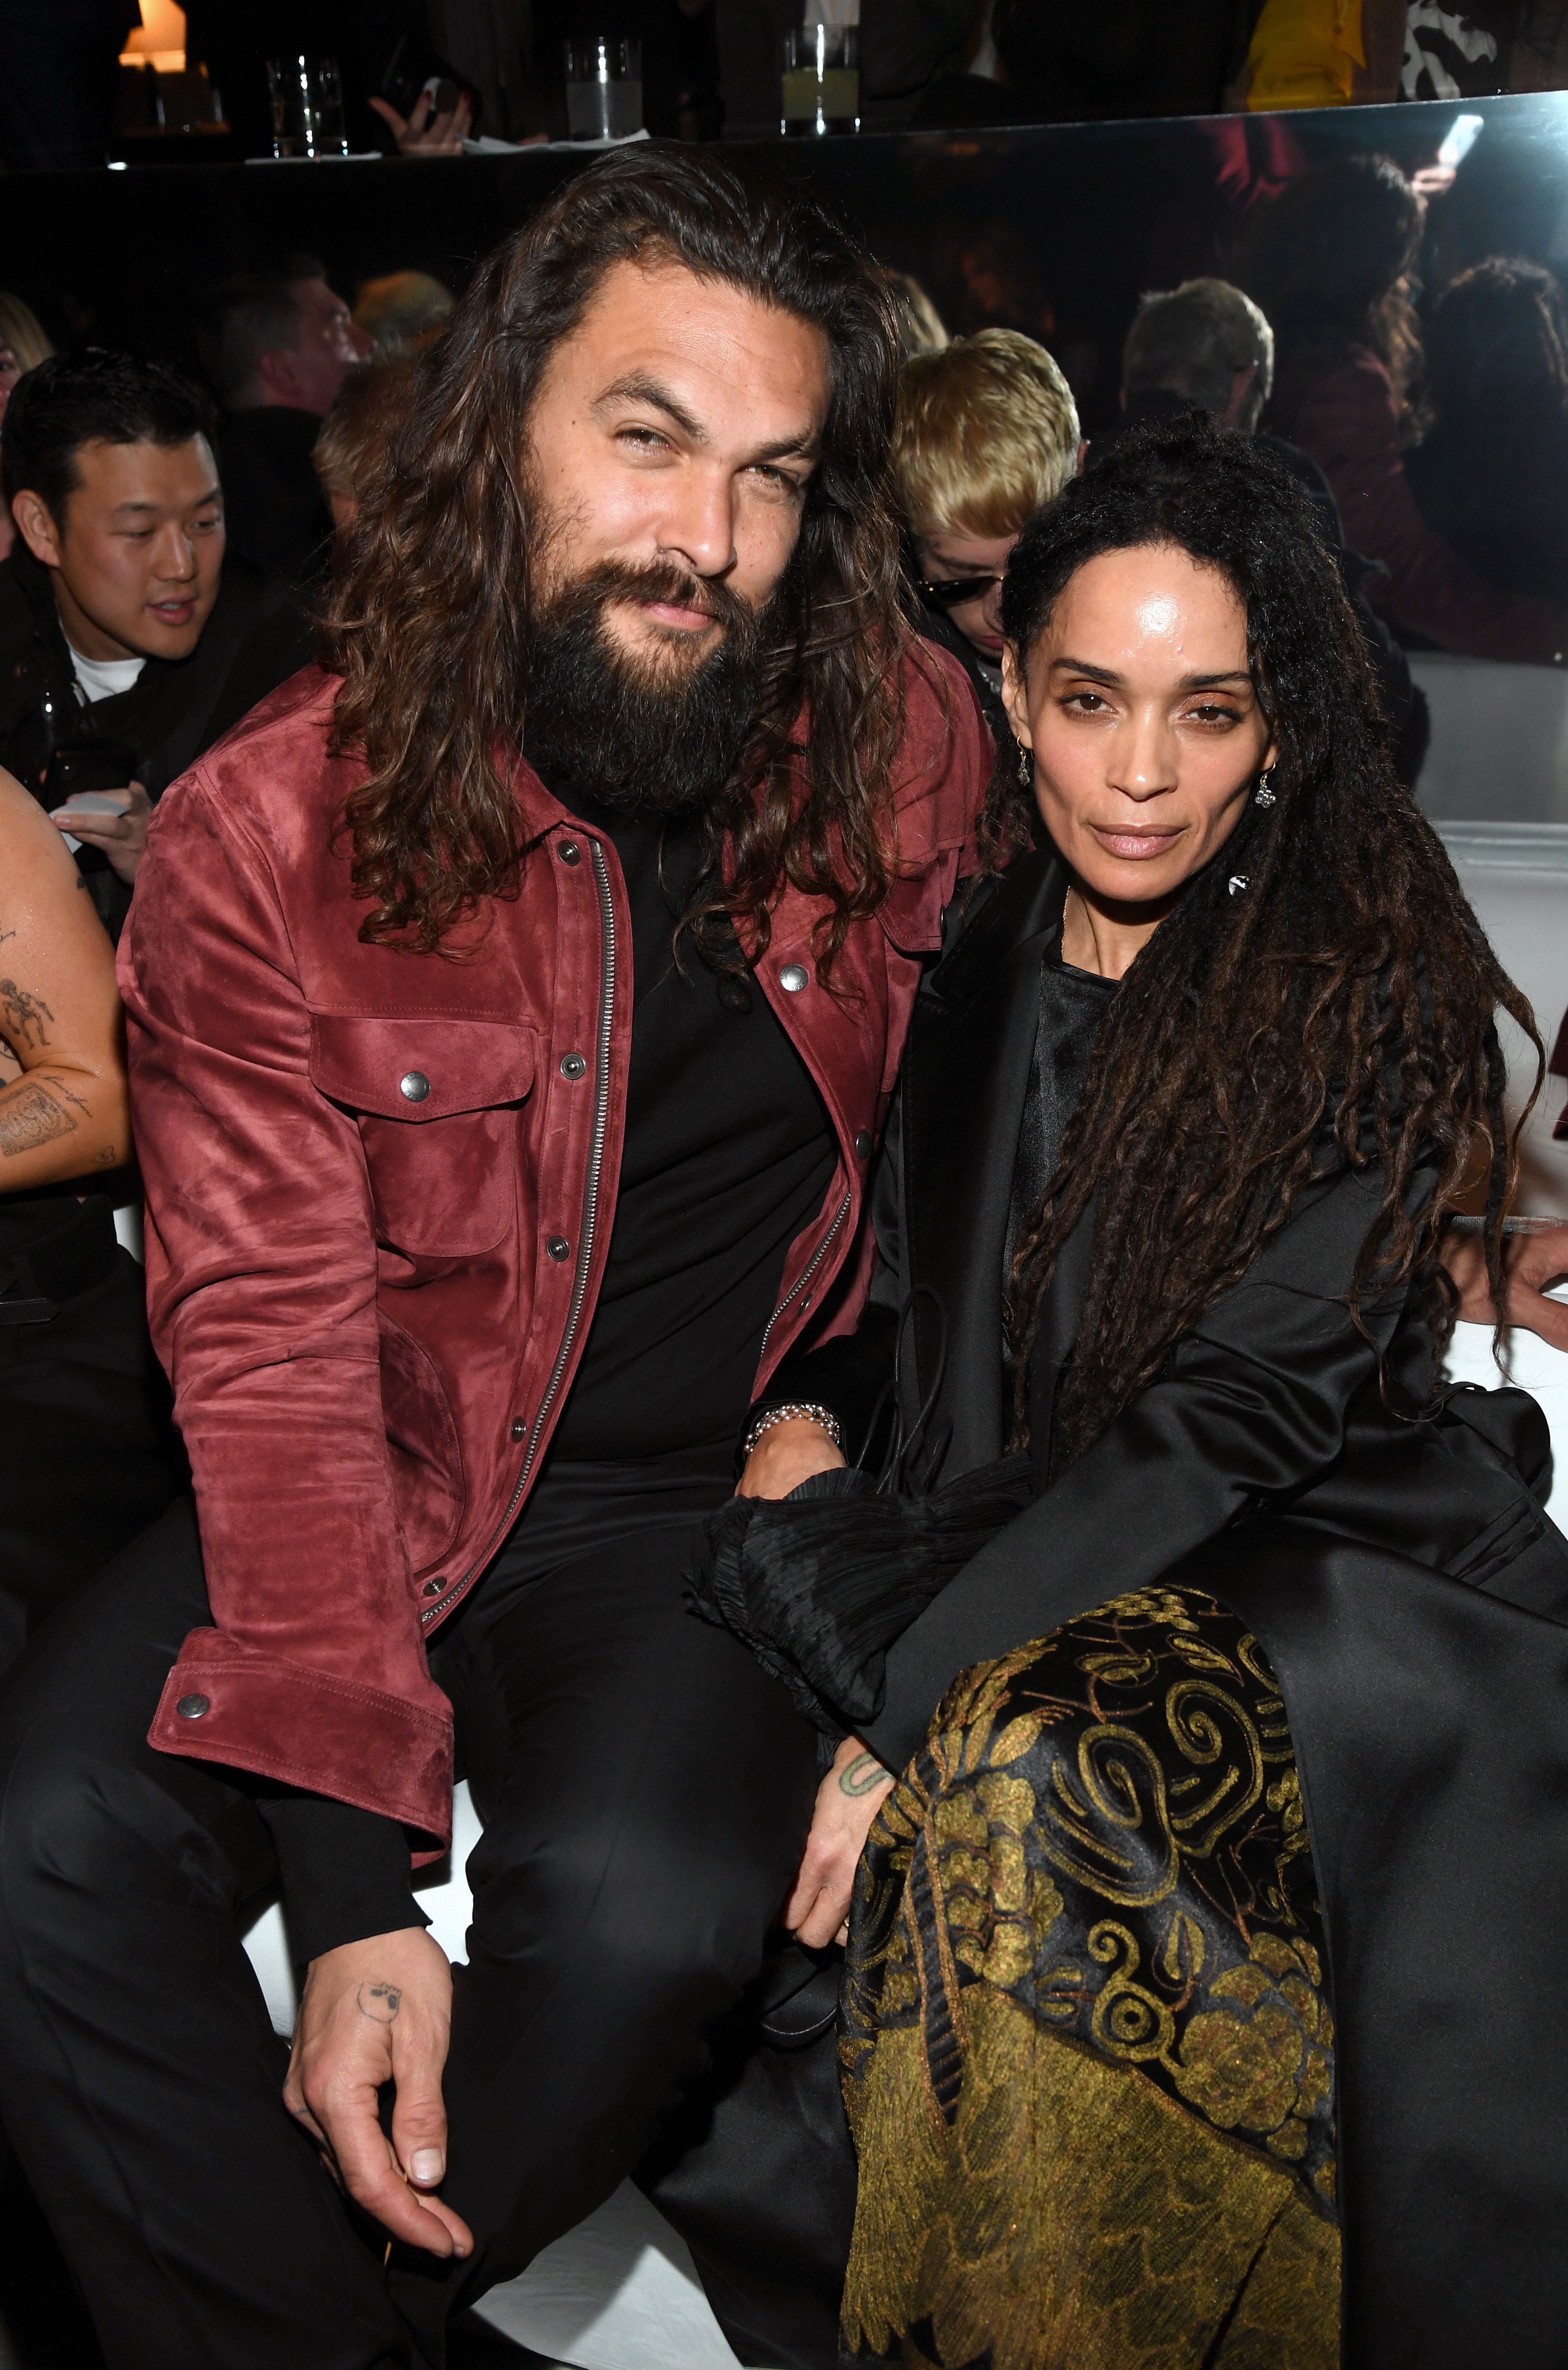  Jason Momoa and Lisa Bonet attend the Tom Ford AW20 Show at Milk Studios on February 07, 2020 in Hollywood, California. |Source: Getty Images